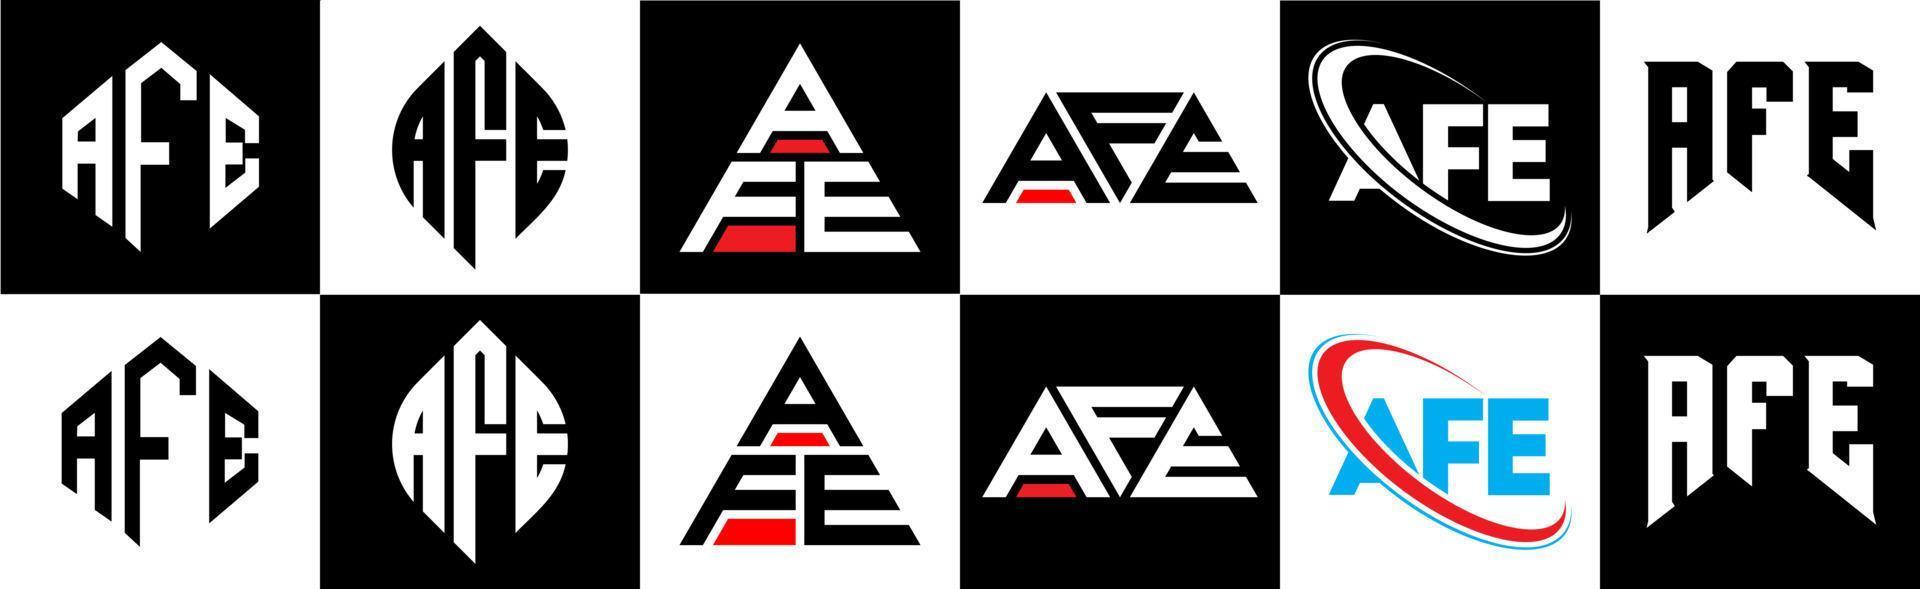 AFE letter logo design in six style. AFE polygon, circle, triangle, hexagon, flat and simple style with black and white color variation letter logo set in one artboard. AFE minimalist and classic logo vector